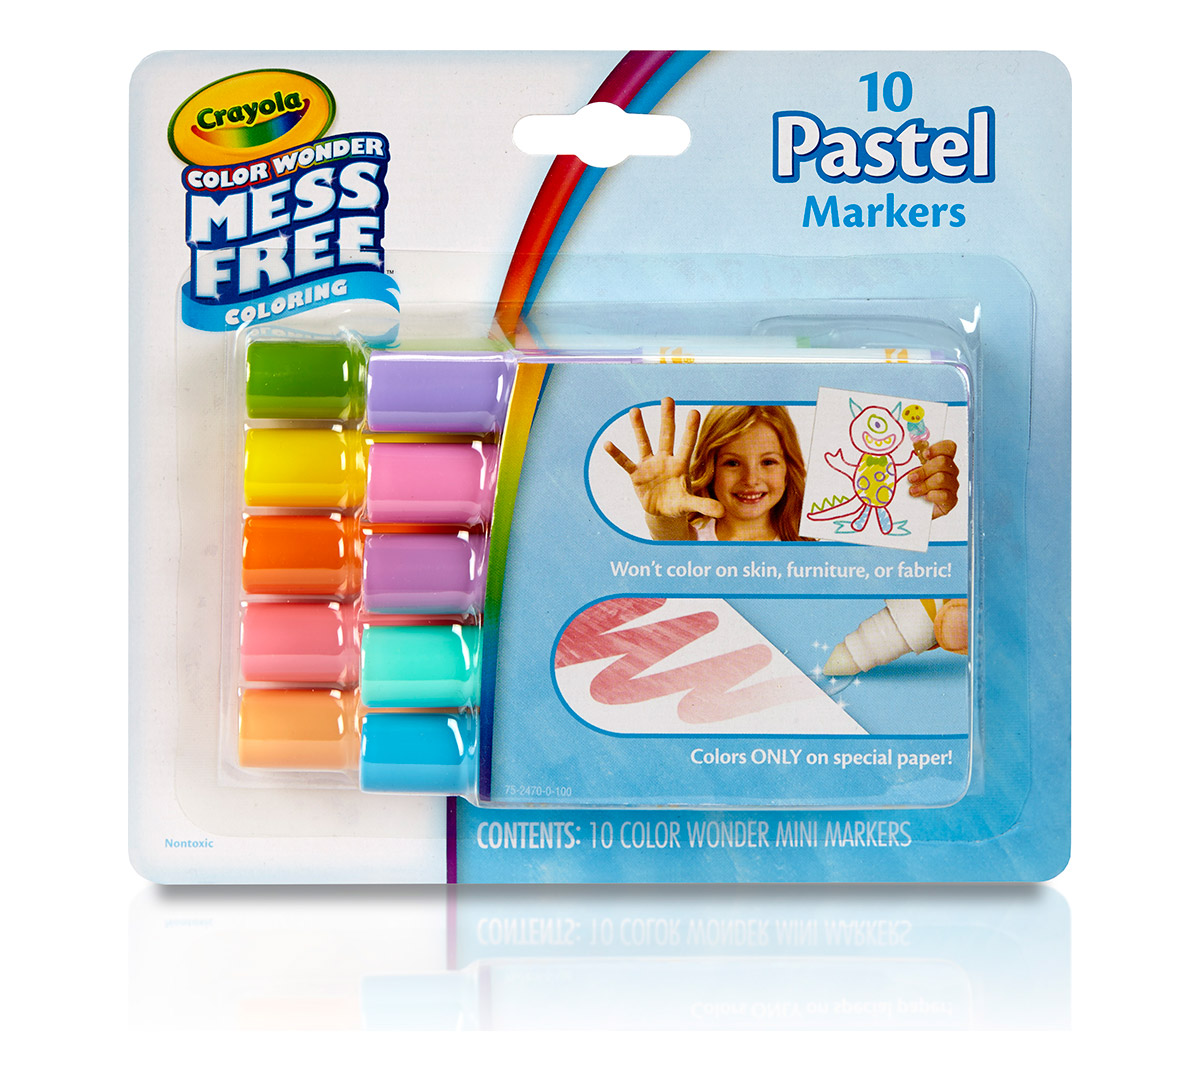 Color Wonder Mess Free Mini Markers, Pastel Colors, 10 Count | Crayola